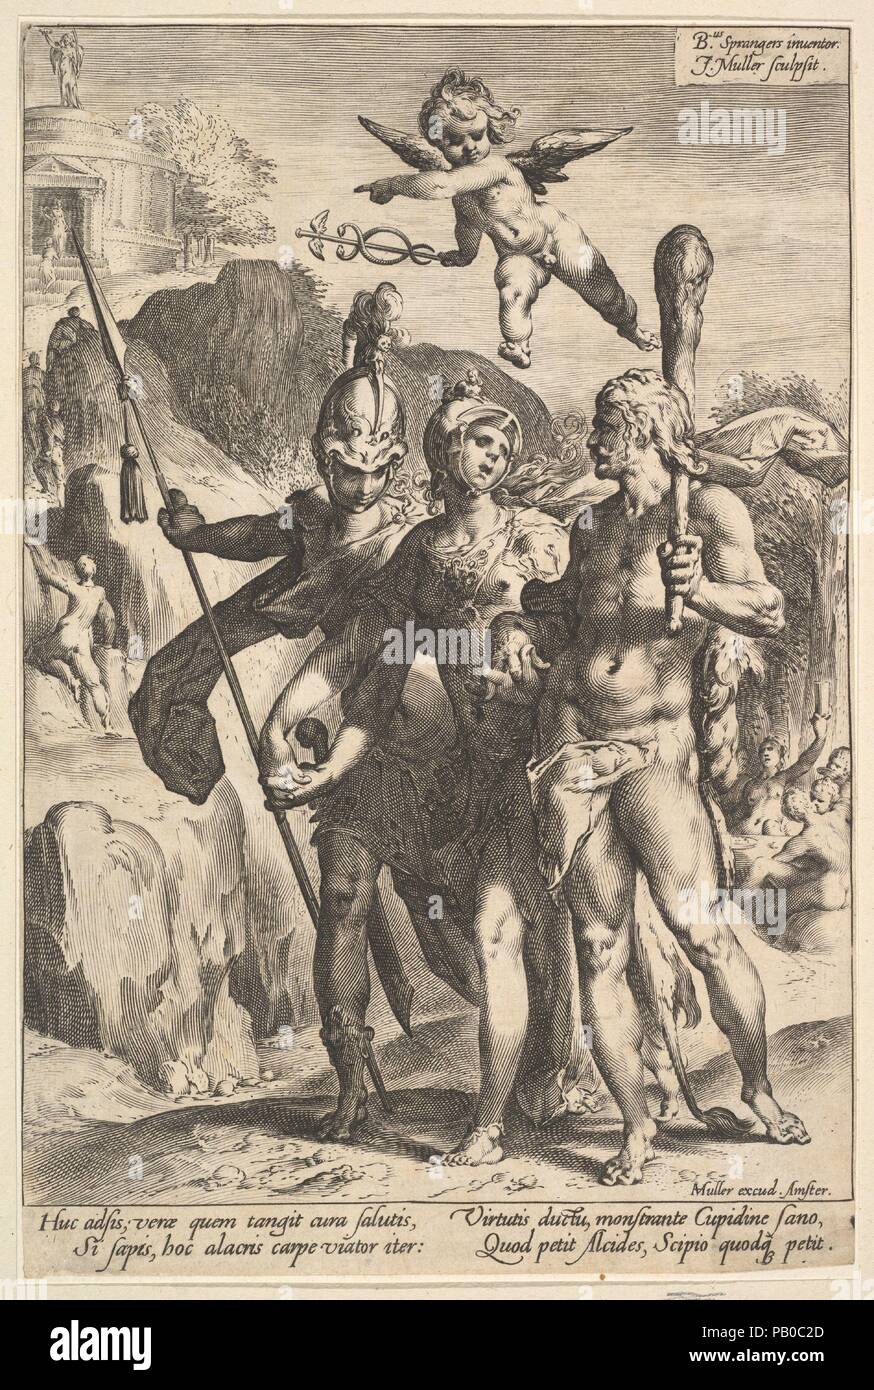 Hercules Being Shown the Mountainous Road to the Temple of Immortal Fame in the Company of Minerva and Mars. Artist: Jan Muller (Netherlandish, Amsterdam 1571-1628 Amsterdam); After Bartholomeus Spranger (Netherlandish, Antwerp 1546-1611 Prague). Dimensions: Sheet: 9 1/2 × 6 5/16 in. (24.1 × 16 cm). Publisher: Harmen Jansz. Muller (Netherlandish, Amsterdam ca. 1540-1617 Amsterdam). Date: ca. 1591. Museum: Metropolitan Museum of Art, New York, USA. Stock Photo